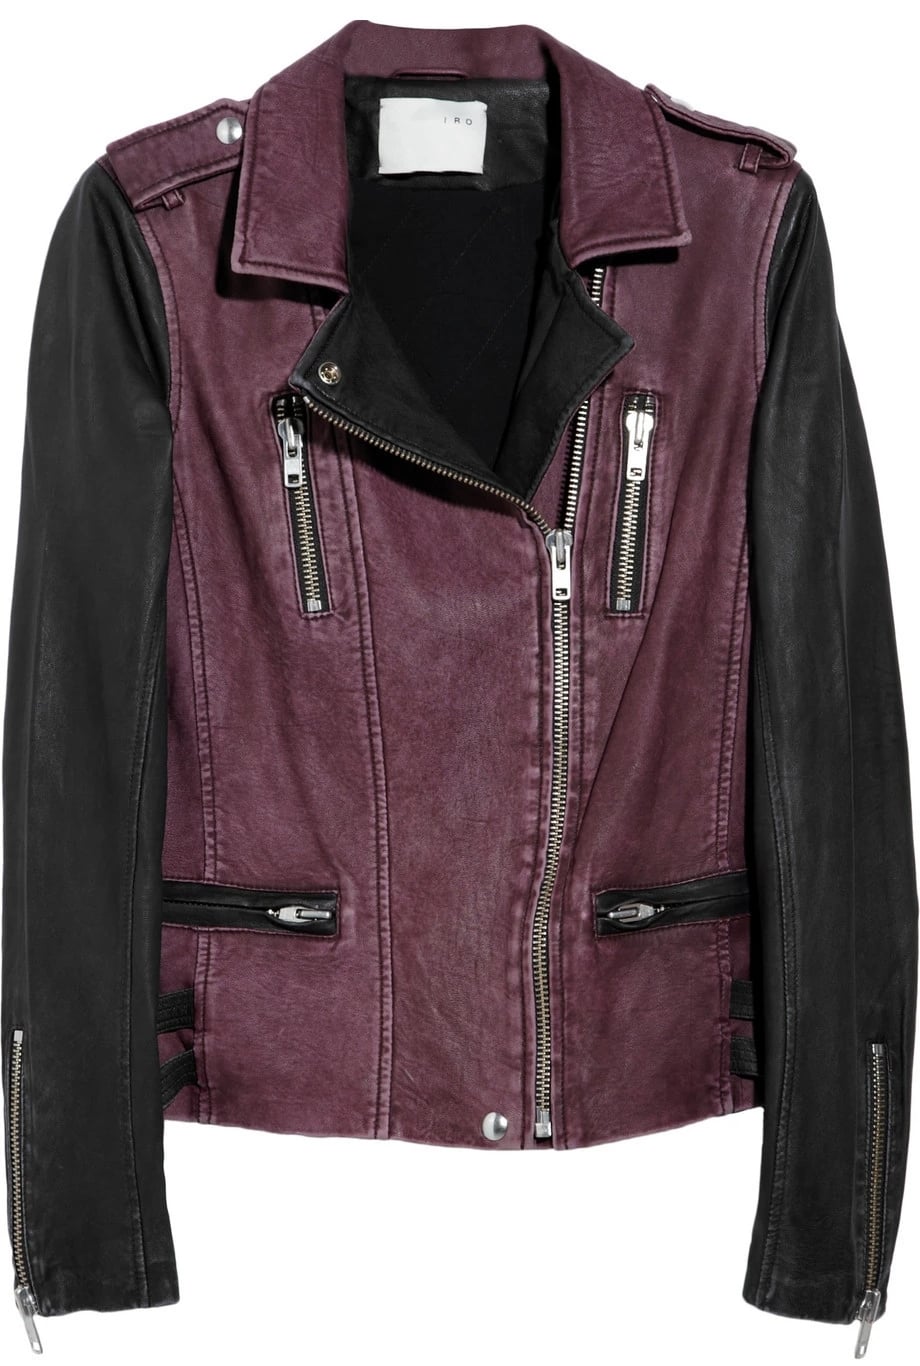 IRO's black and plum leather biker jacket adds the label's signature mix of downtown edge and Parisian chic to off-duty outfits